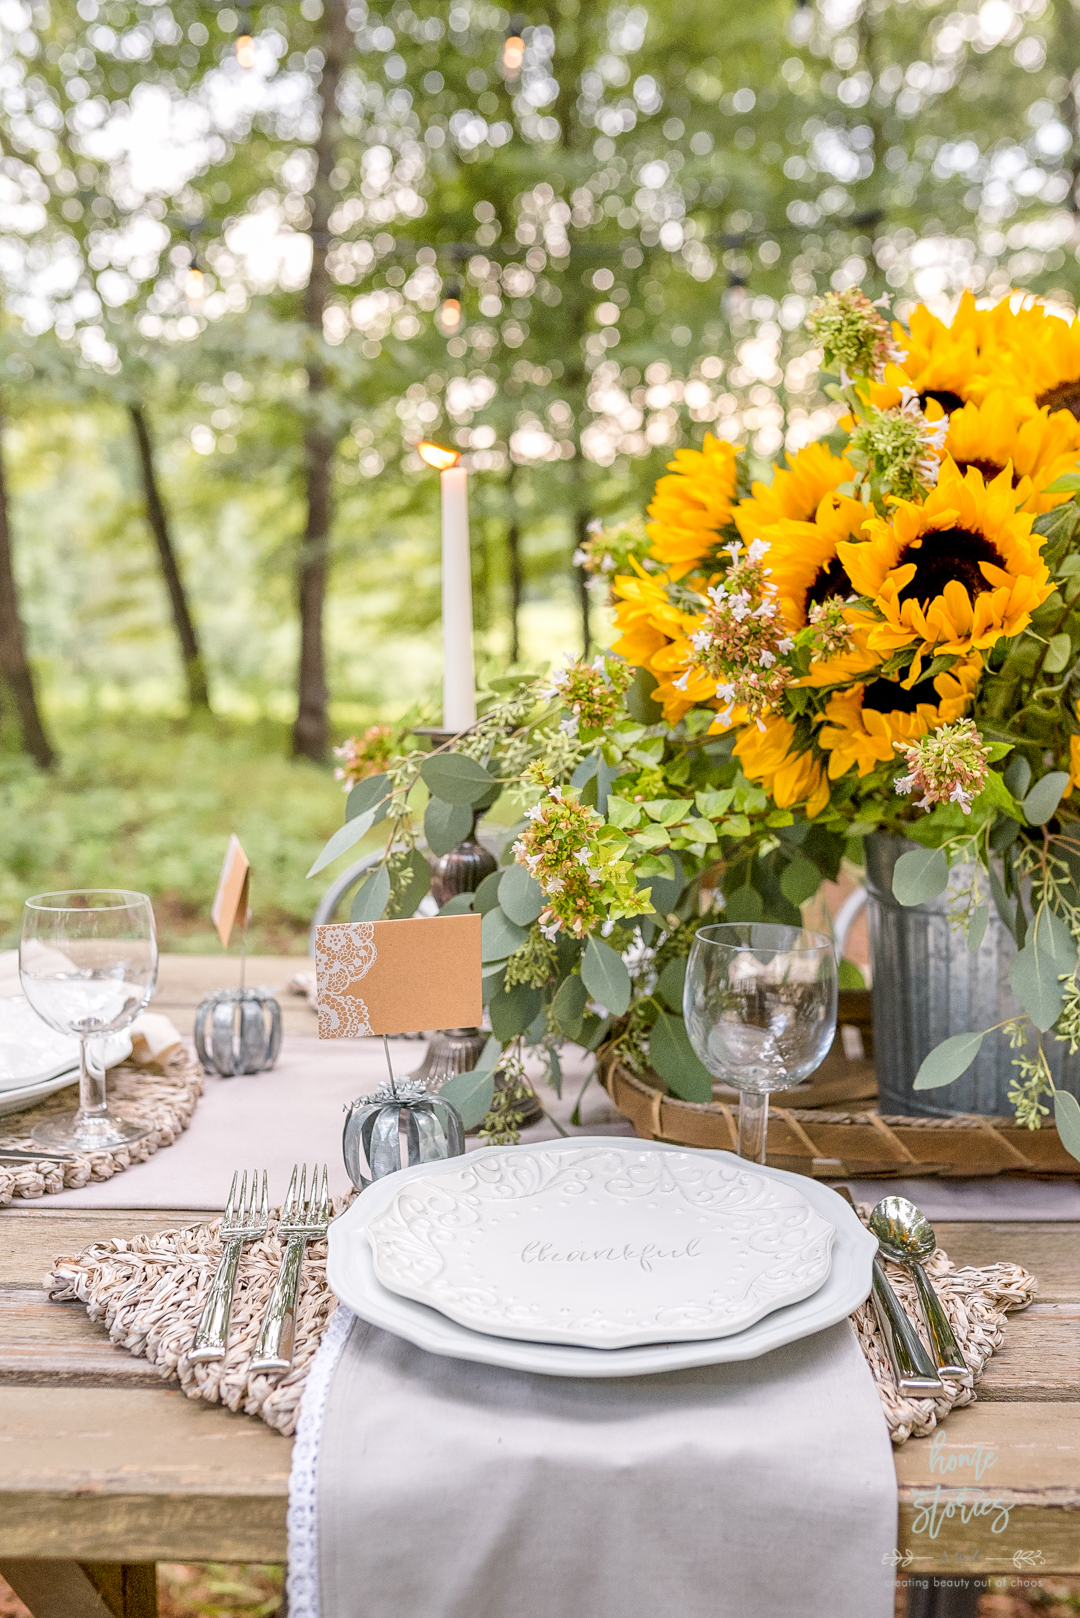 5 Outdoor Entertaining Tips to Creating a Gorgeous Fall Tablescape ...